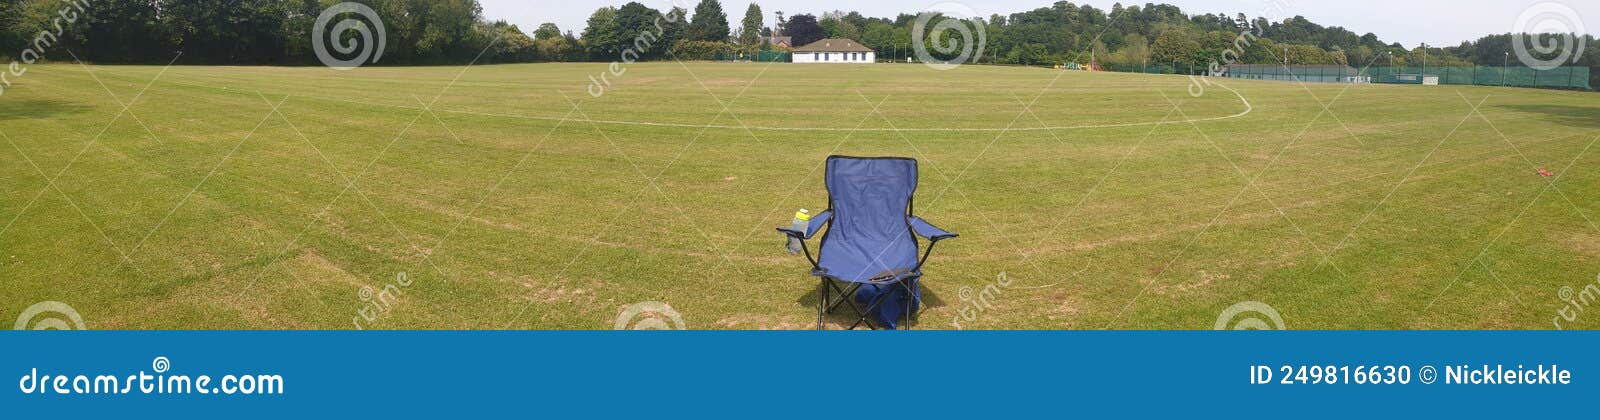 single beach chair in an empty playing field on a summers day